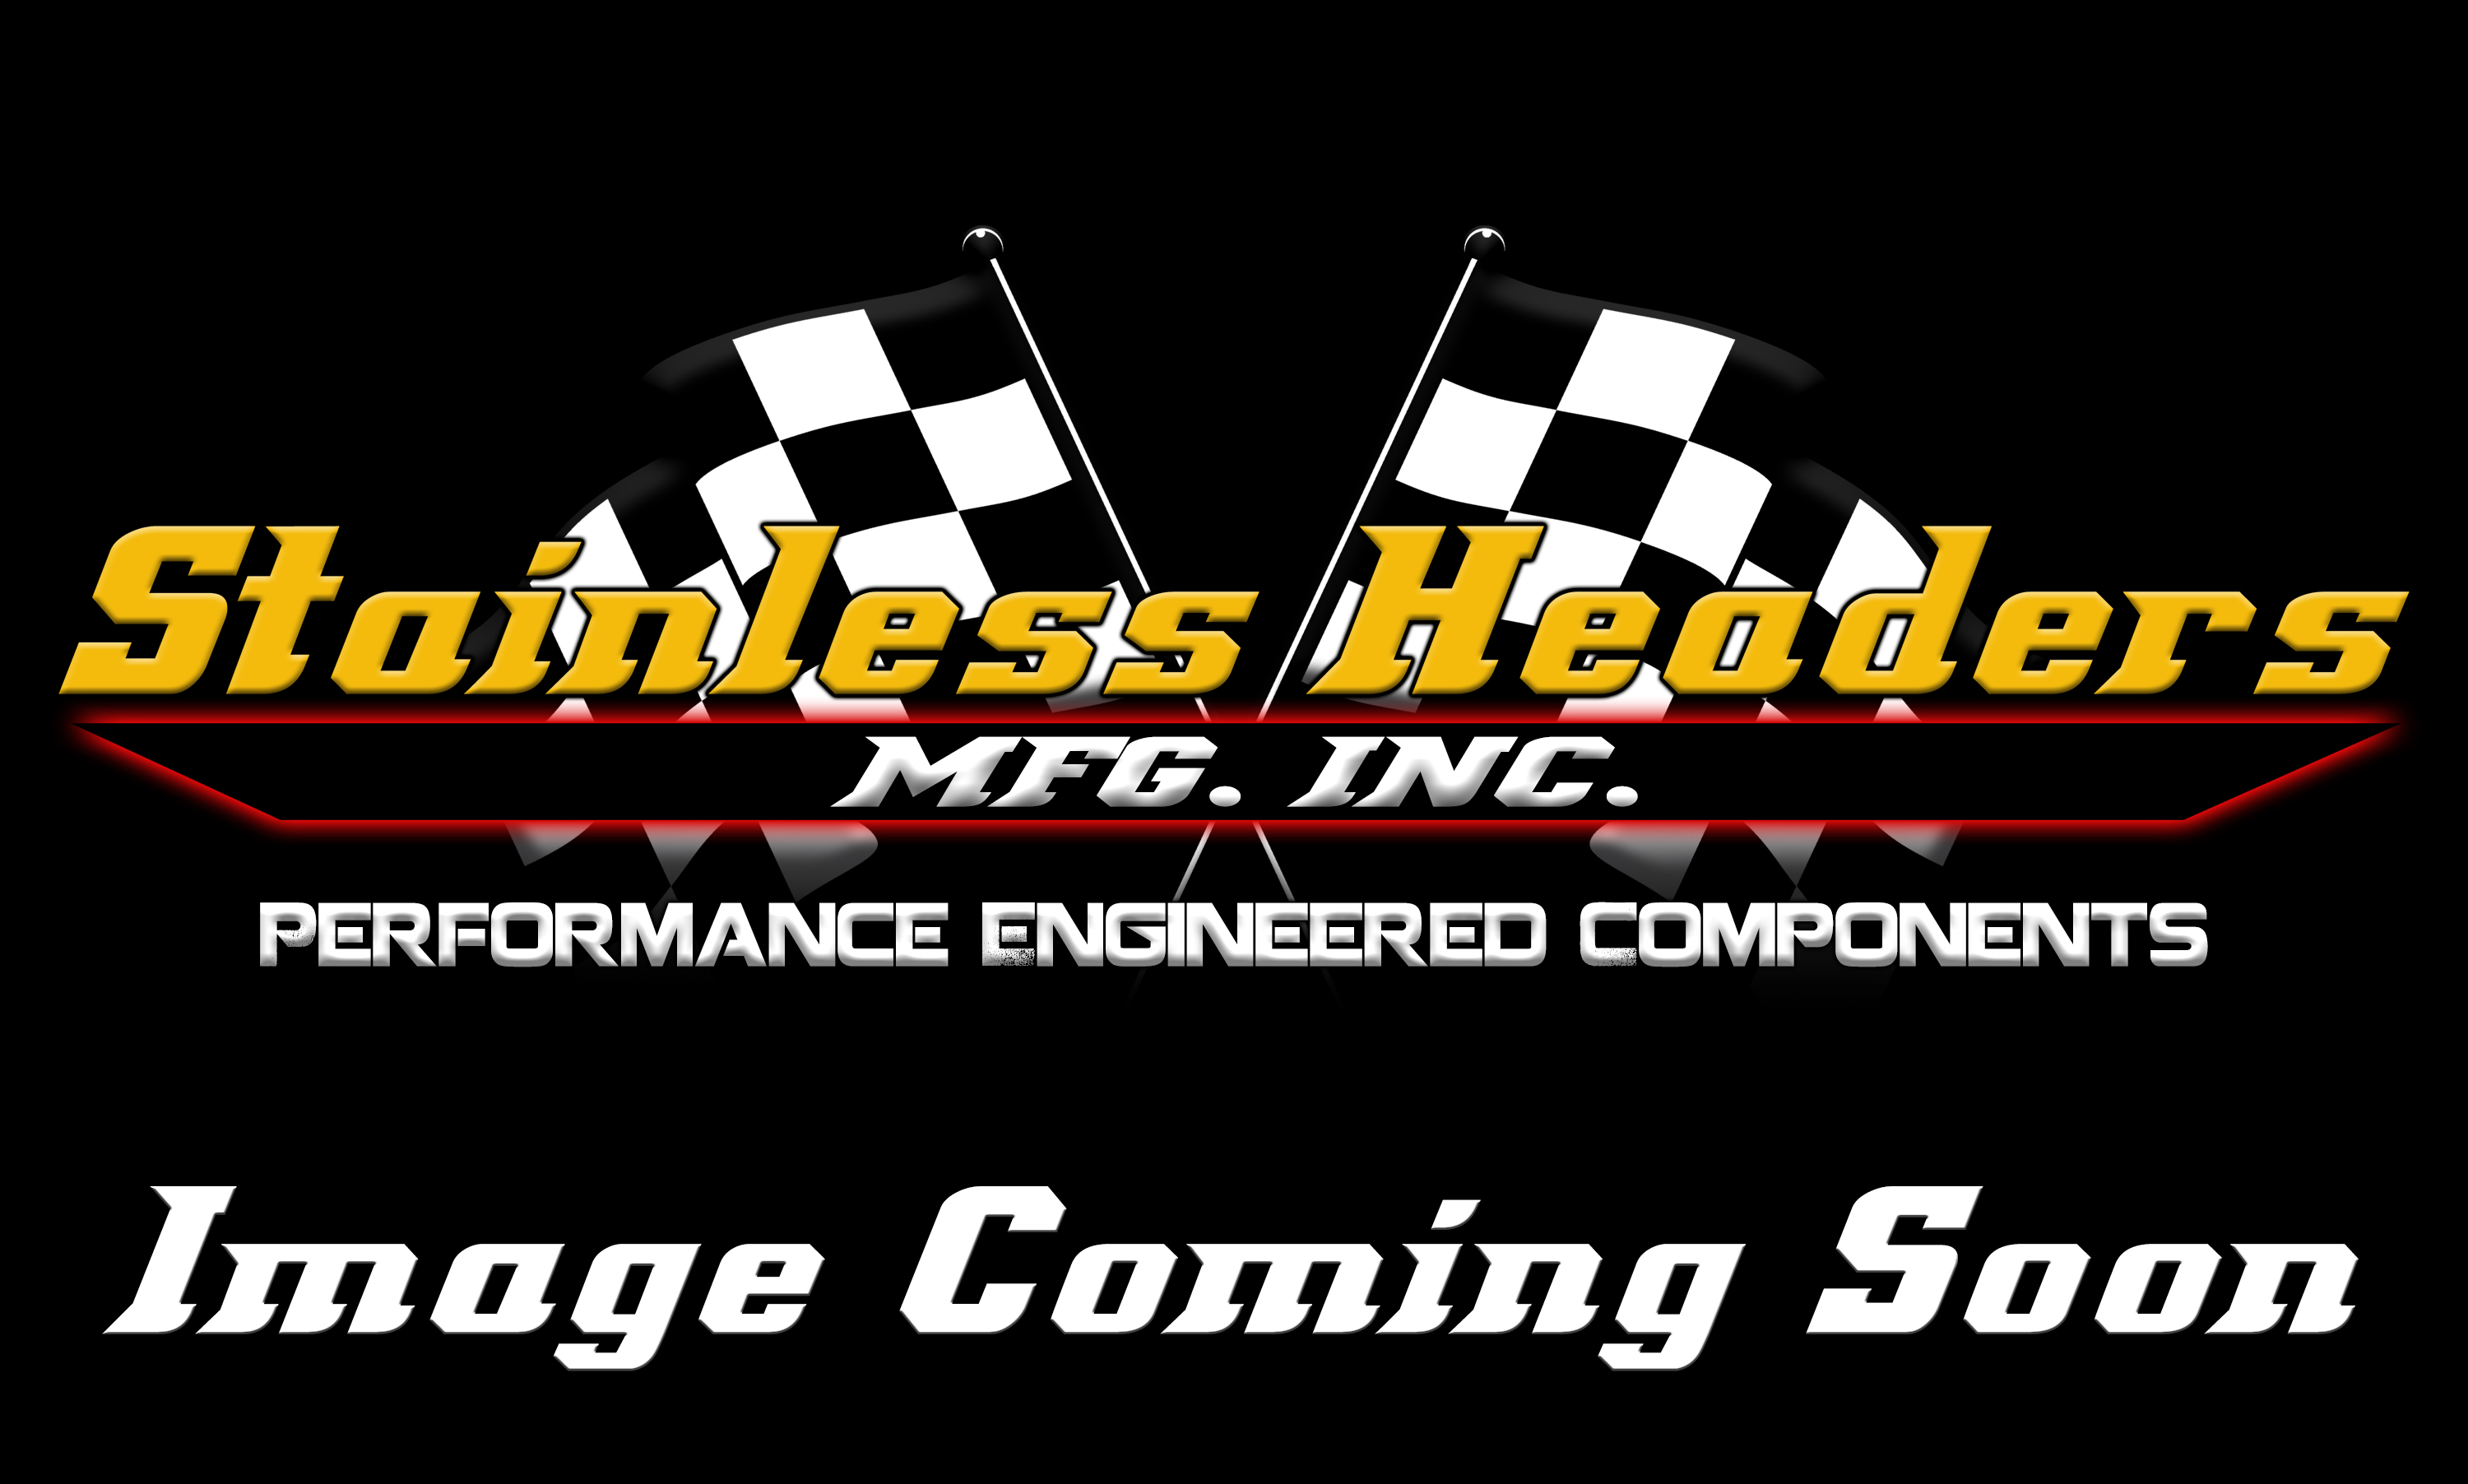 CompTurbo Technology Turbochargers - Comp Turbo Journal Bearing Turbochargers - CompTurbo Technologies - CTR4093H-6871 Reverse Rotation 360 Journal Bearing Turbocharger (1100 HP)